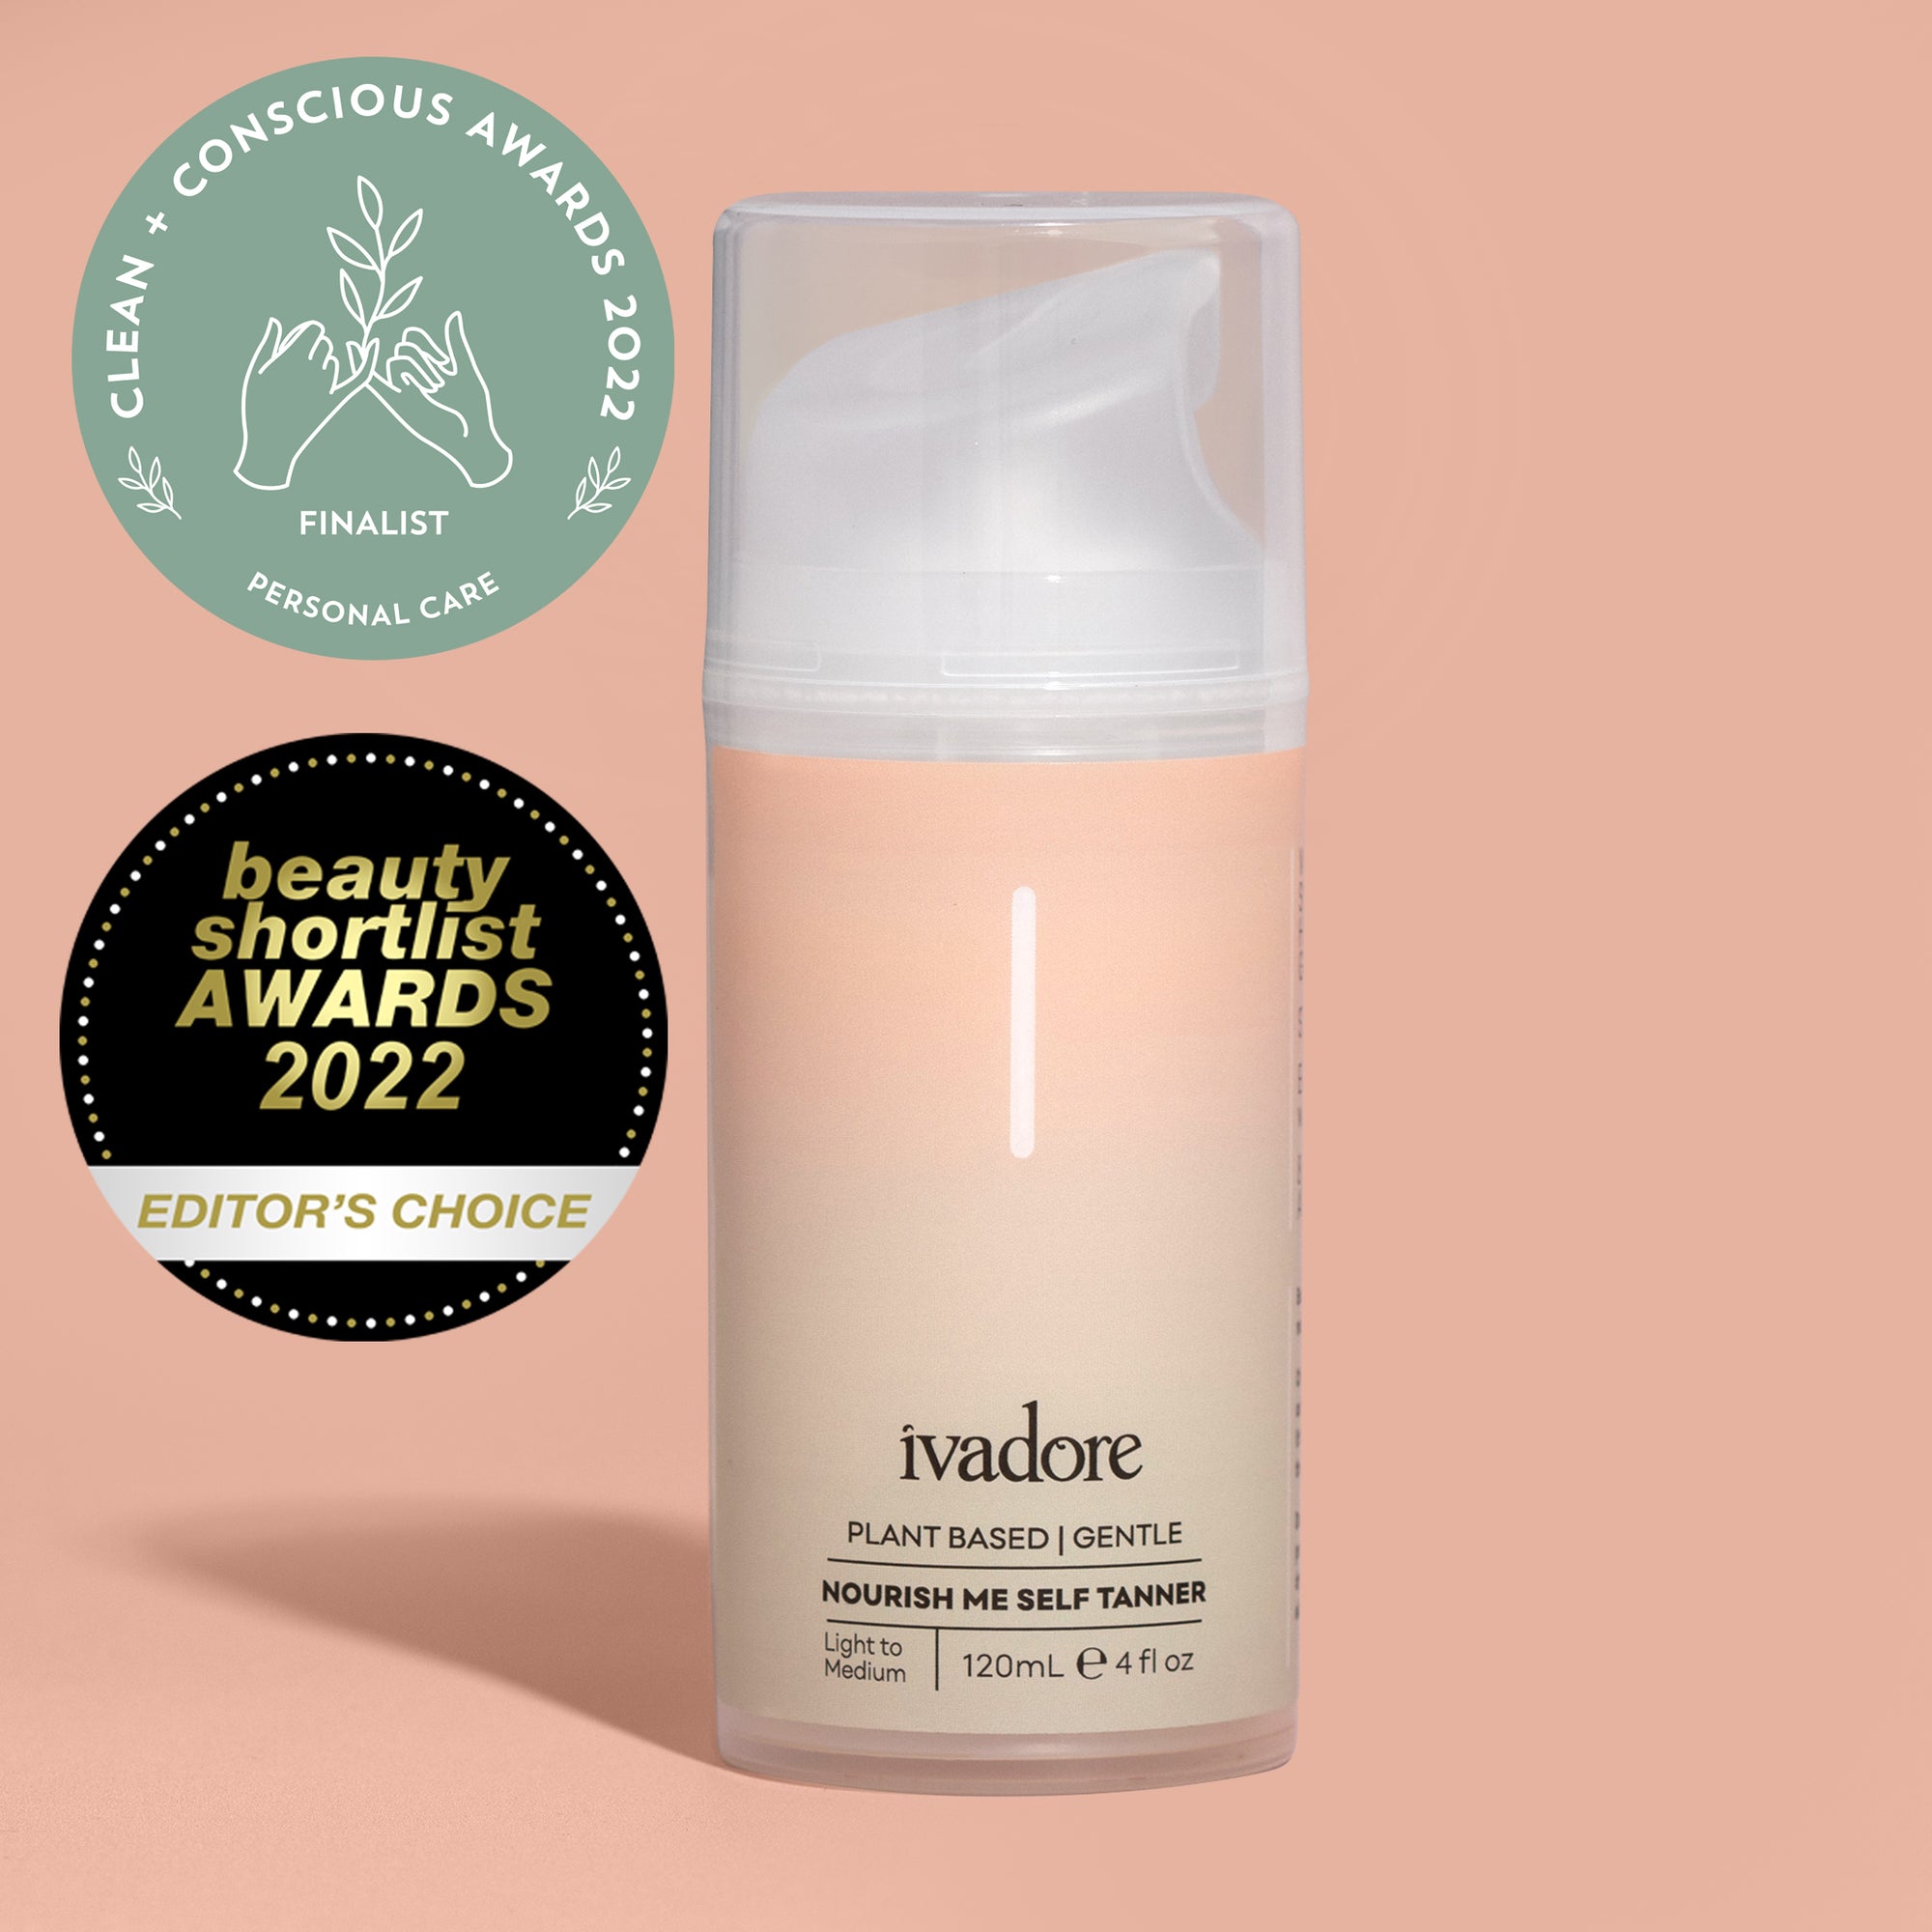 Nourish Me Self Tanner bottle standing on peach coloured background with shadow and award badges